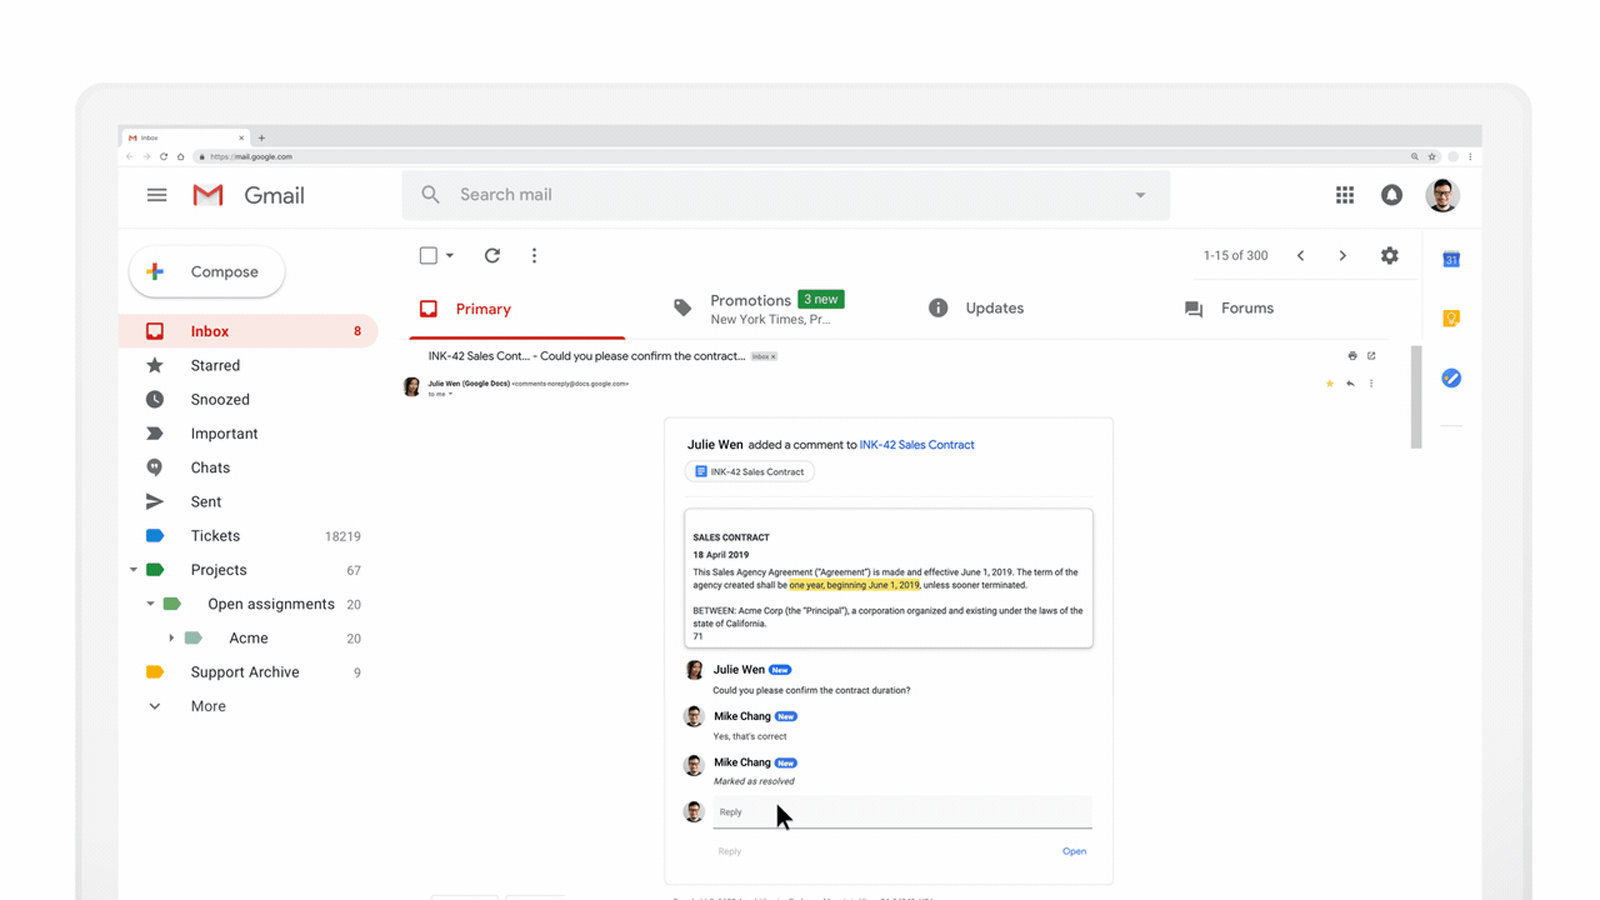 Google's AMP tech working in Gmail.